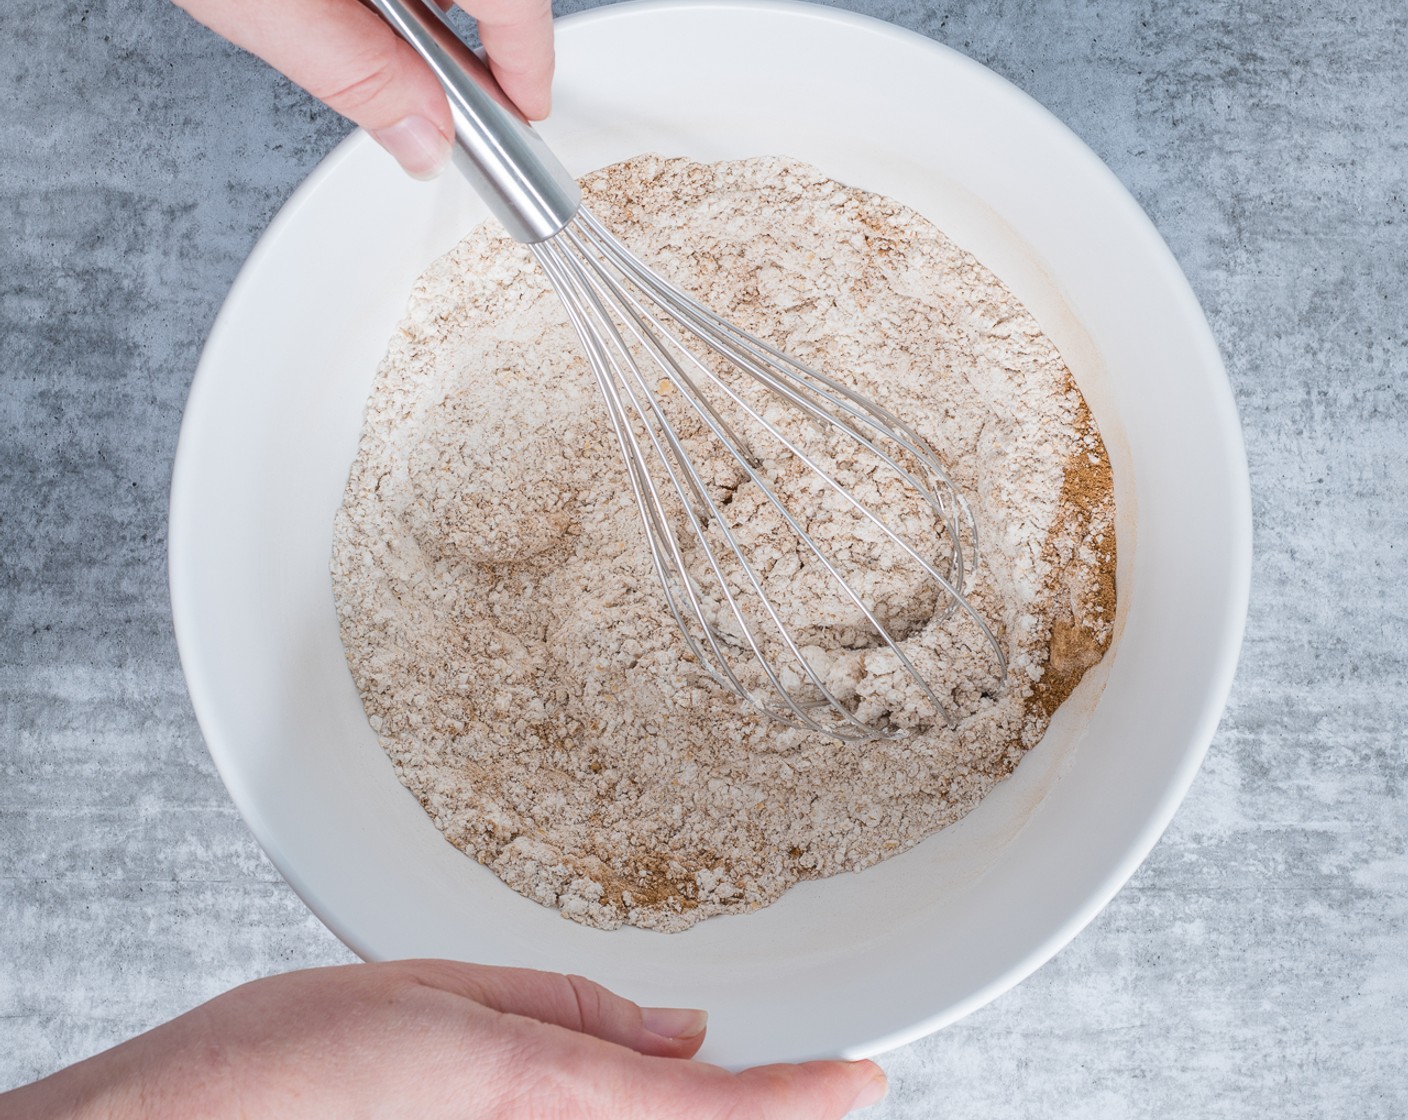 step 2 Whisk the Whole Wheat Flour (2 cups), Baking Soda (1/2 Tbsp), Pumpkin Pie Spice (1/2 Tbsp), and Kosher Salt (1/2 tsp) together in a large bowl.